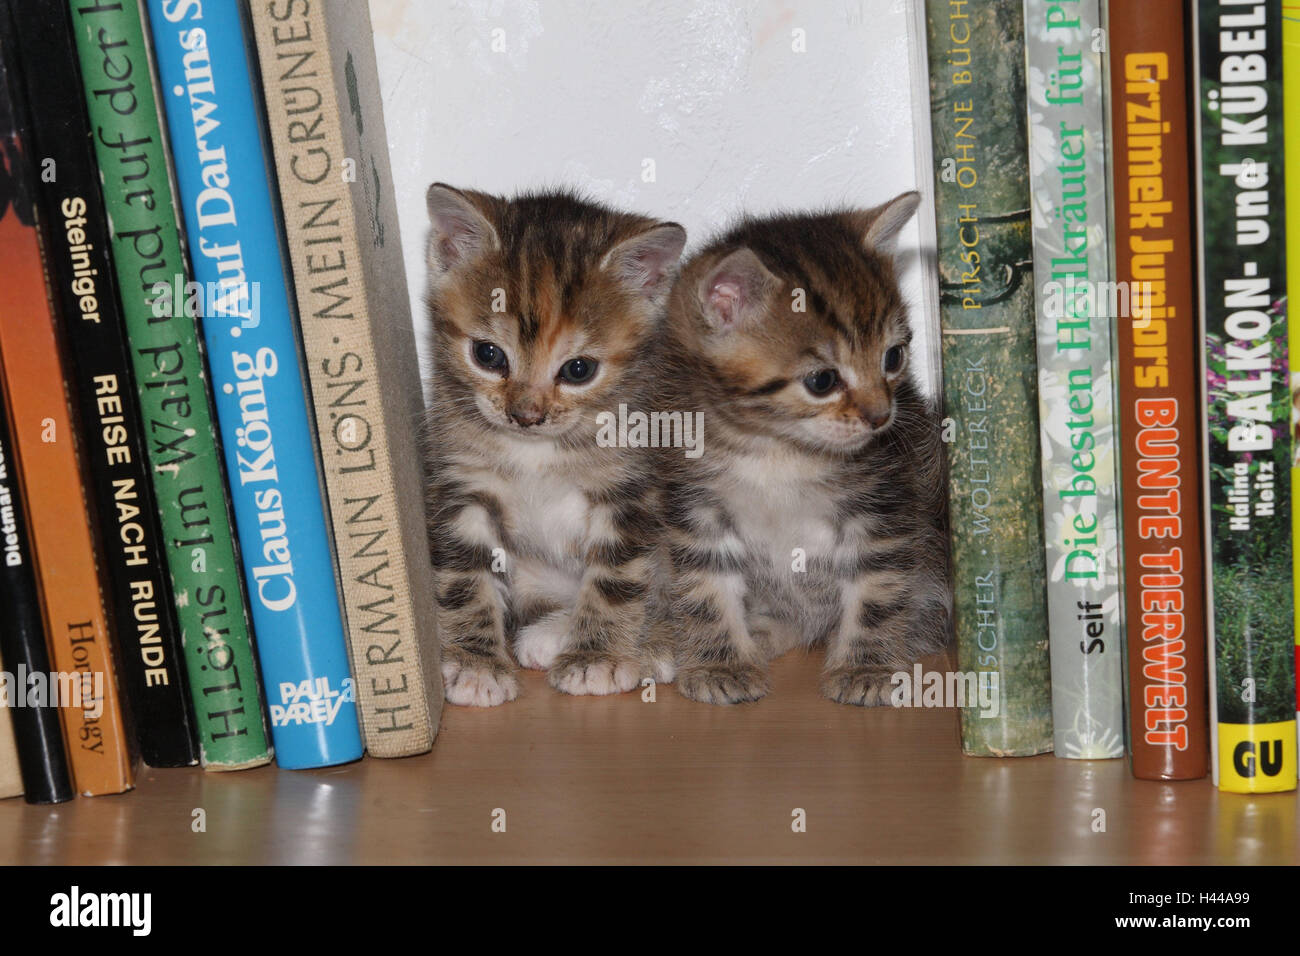 Shelf, cats, young, hide, books, bookshelf, animals, mammals, pets, small cats, Felidae, domesticates, house cat, young animal, kitten, two, siblings, small, awkward, clumsy, sweetly, striped, cohesion, love, suture, togetherness, young animals, animal babies, curiosity, hiding place, play, together, young animals, animal baby, inside, Stock Photo